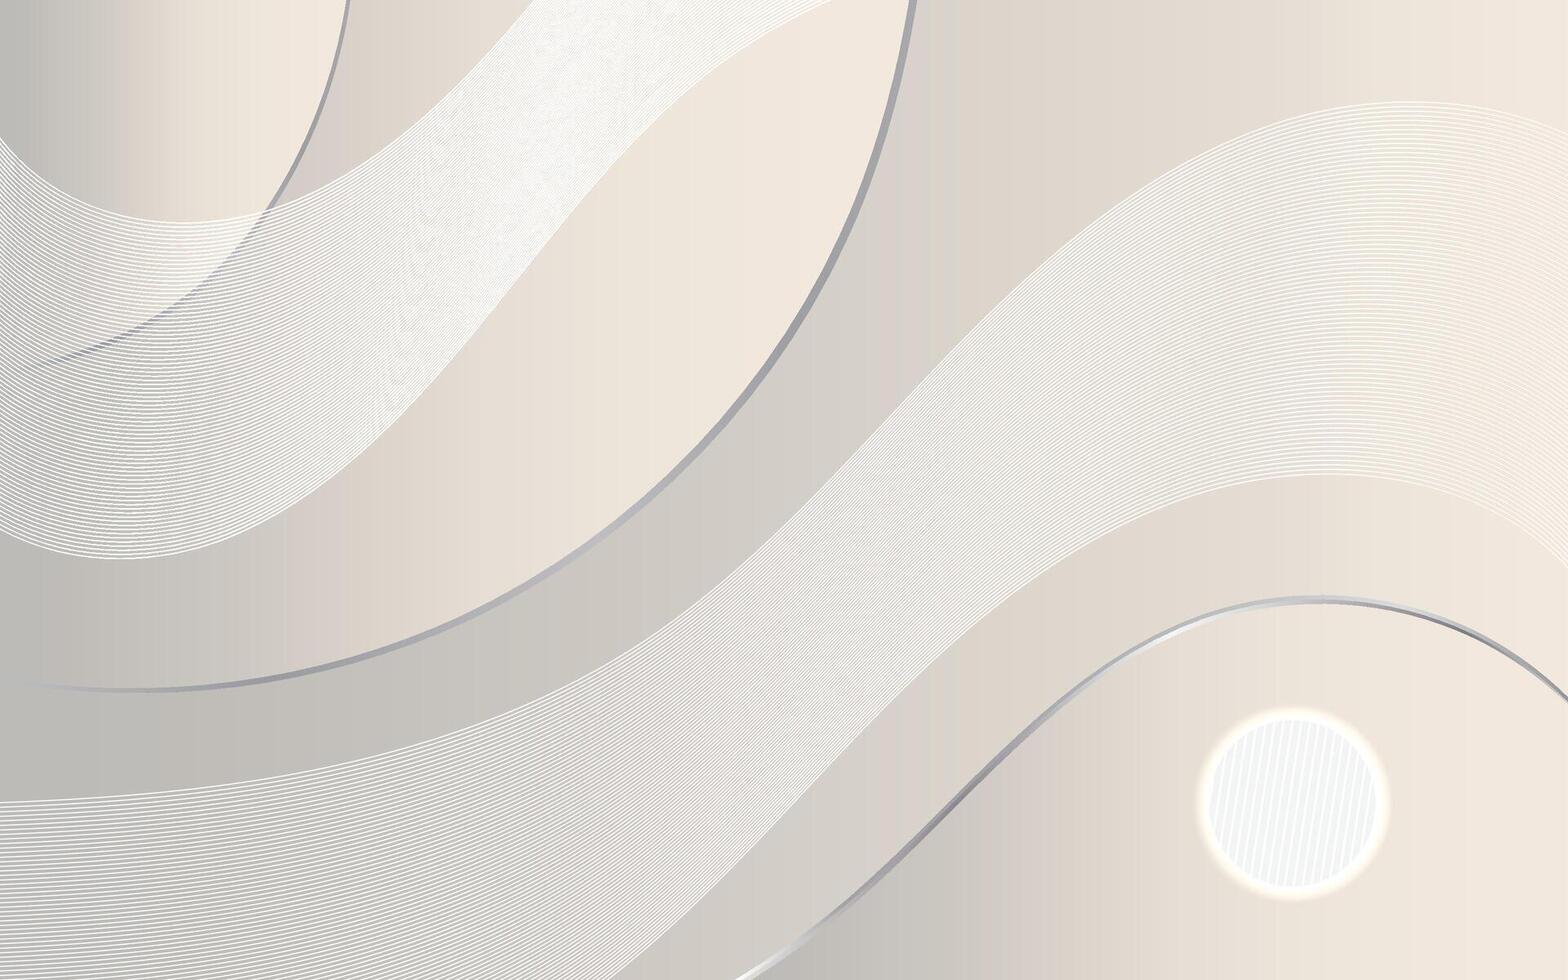 Abstract white wavy background design vector illustration eps 10